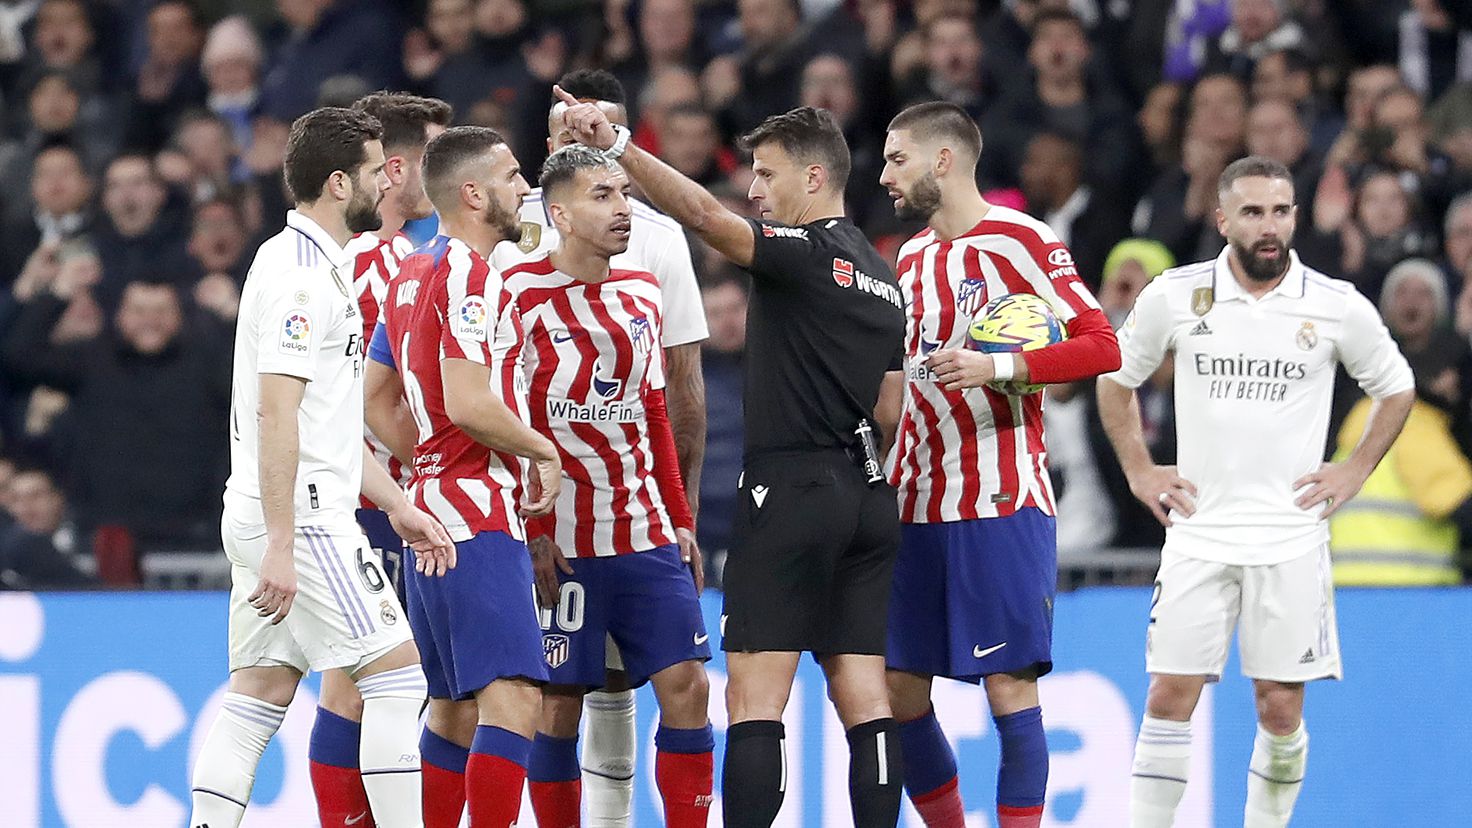 Atleti's list of grievances: derbies, Camp Nou, only one penalty in favor...
